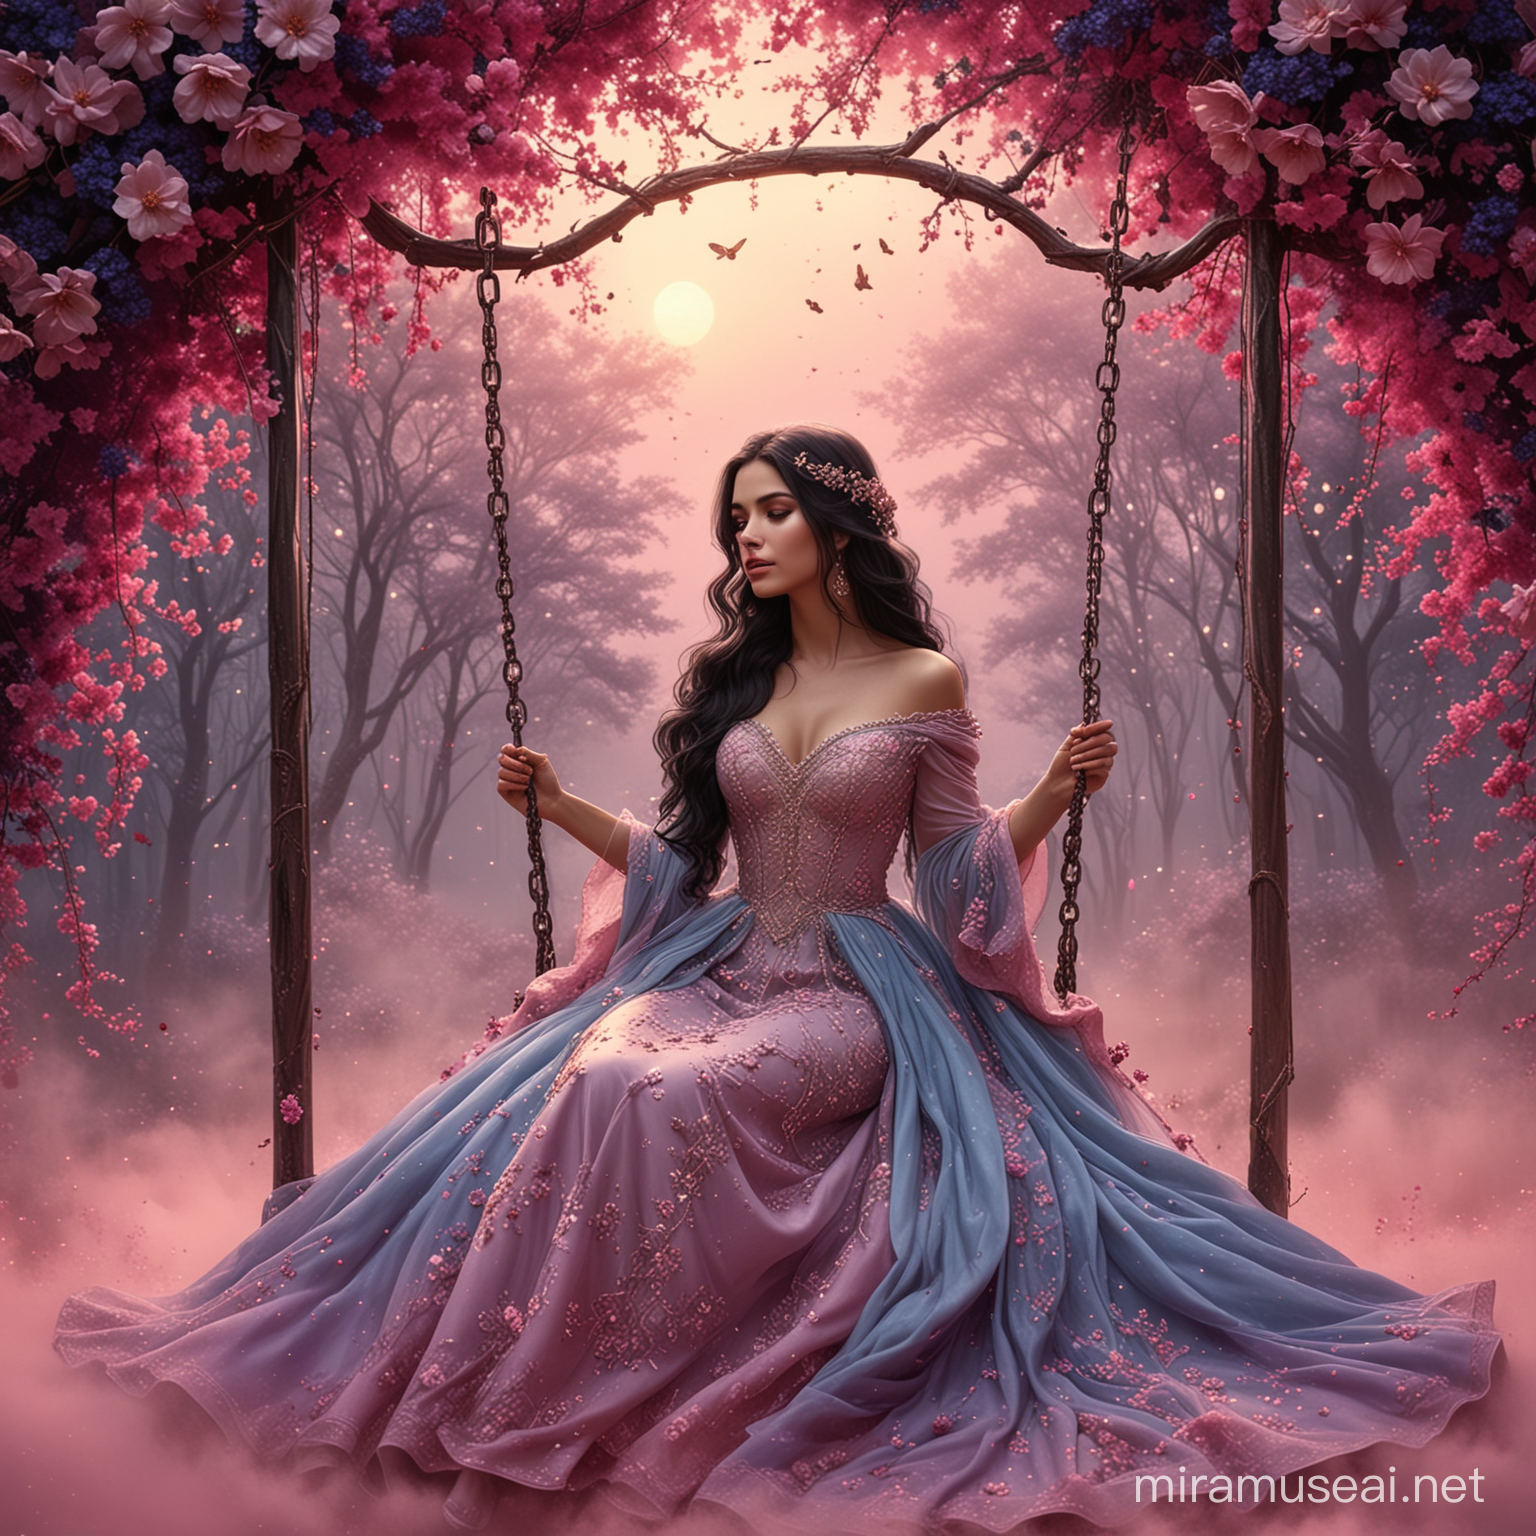 A beautiful woman, from profile, sitting on a swing, in the middle of an opened big fower, surrounded by dark pink dust and small dark purple flowers. Long wavy black hair. Elegant long blue wedding dress,embroidering bridal veil, haute couture. Background sky with golden and dark pink nebula. Background floral trees. 8k, fantasy, illustration, digital art, illustration art, fantasy art, fantasy styl